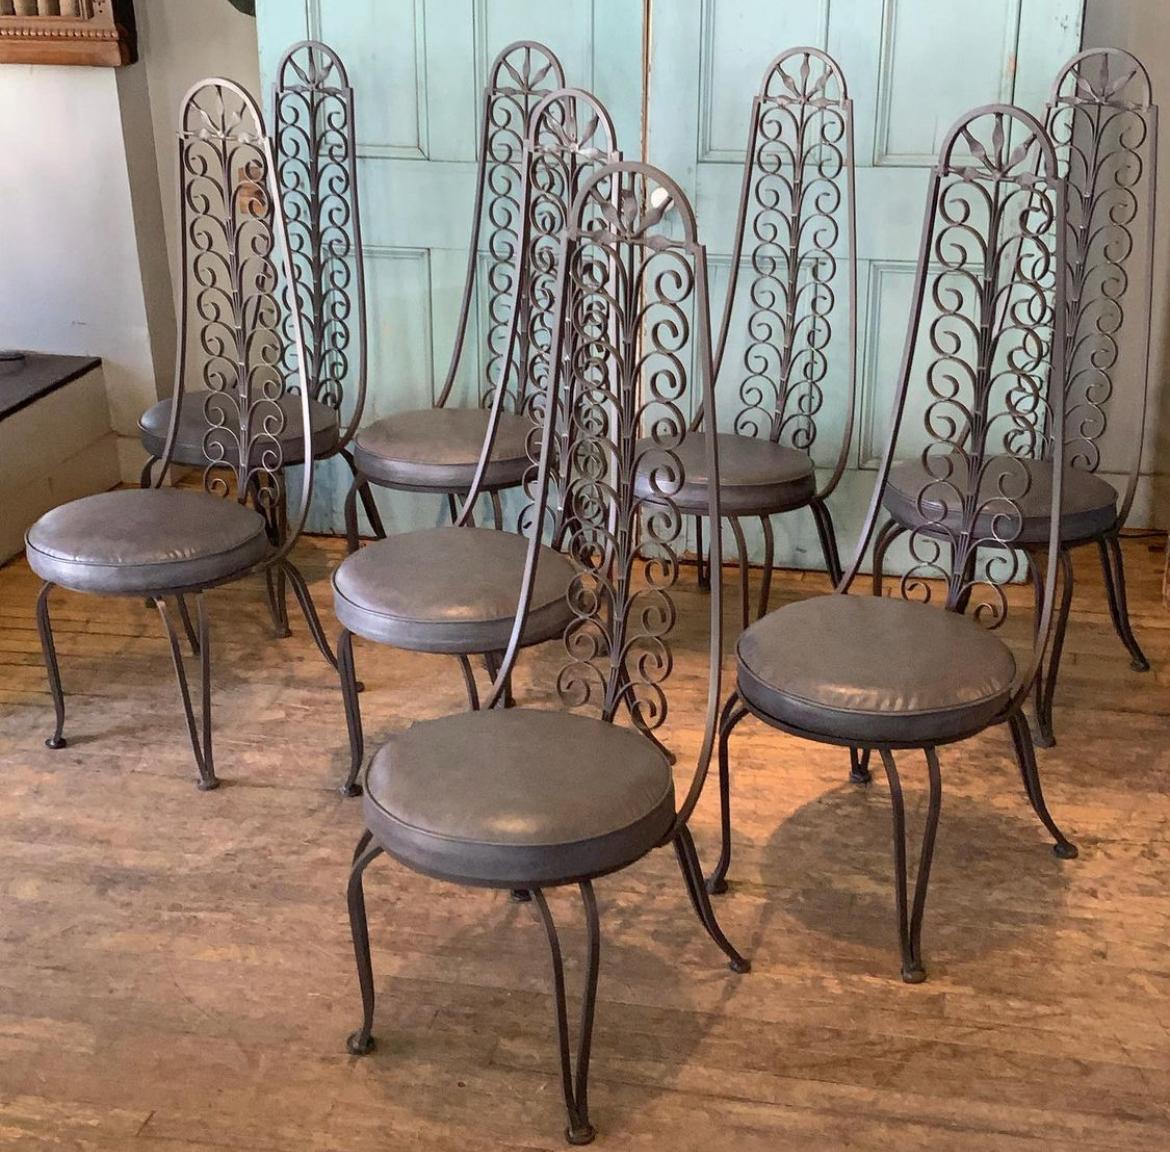 A large set of eight of these amazing 1950's wrought iron dining chairs designed by Arthur Umanoff. Extremely well made and wonderful details, with a double scroll pattern in the tall curved seat back. Curved legs supported cushioned seats. The